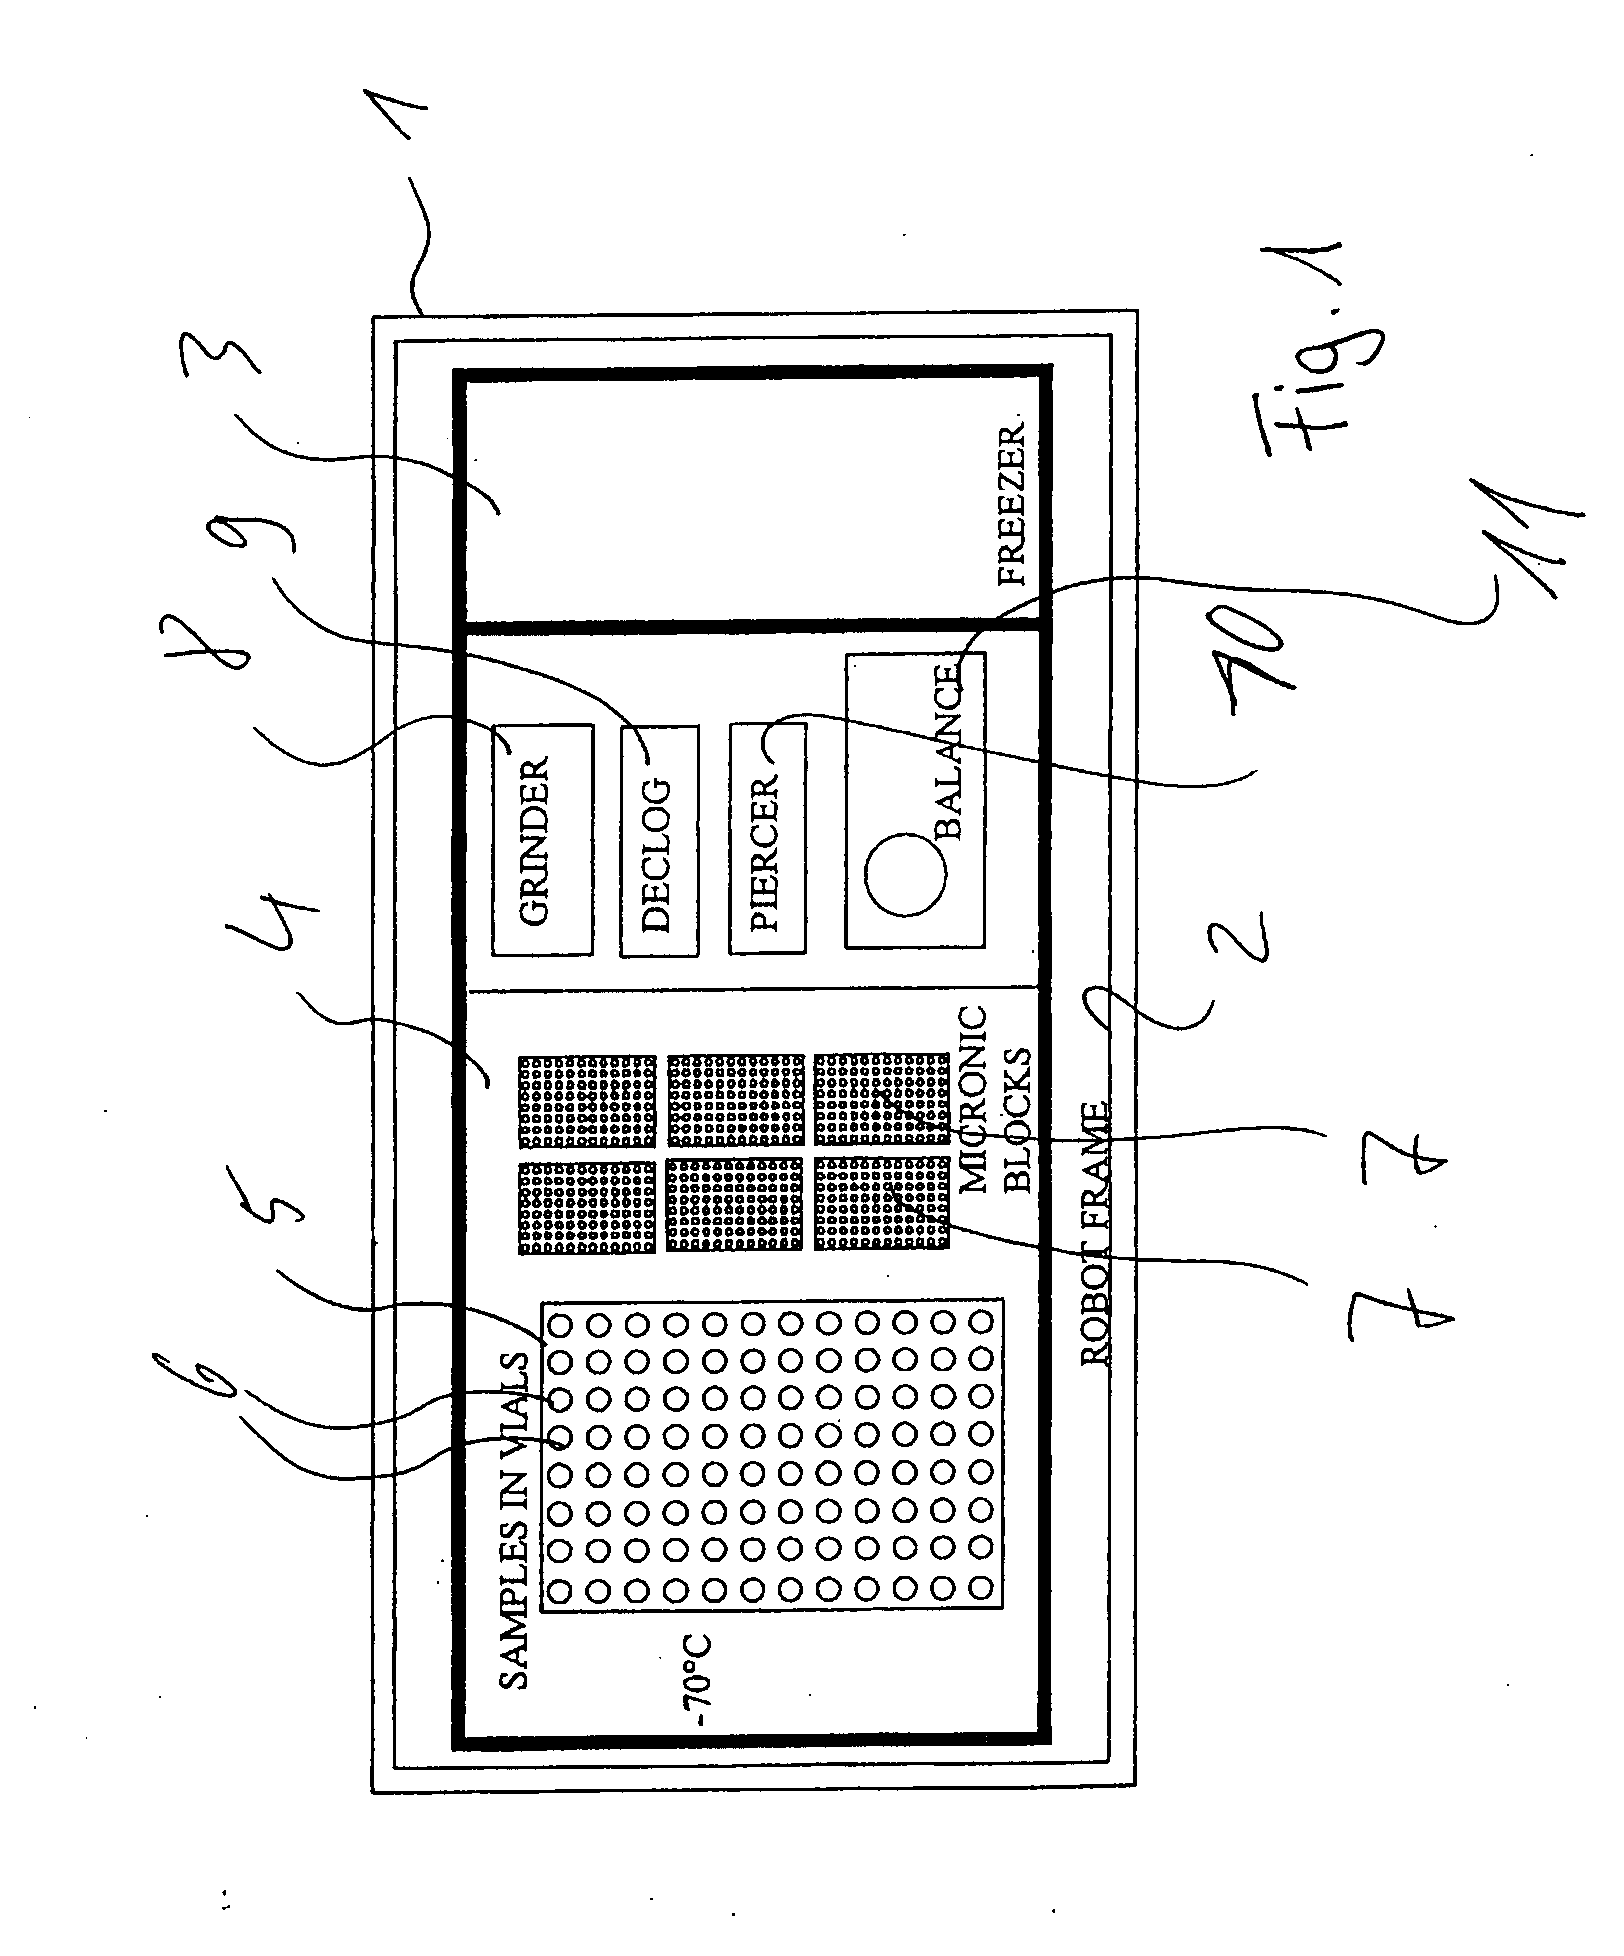 System and method for producing weighed portions of powder from at least one biological material at cryotemperatures